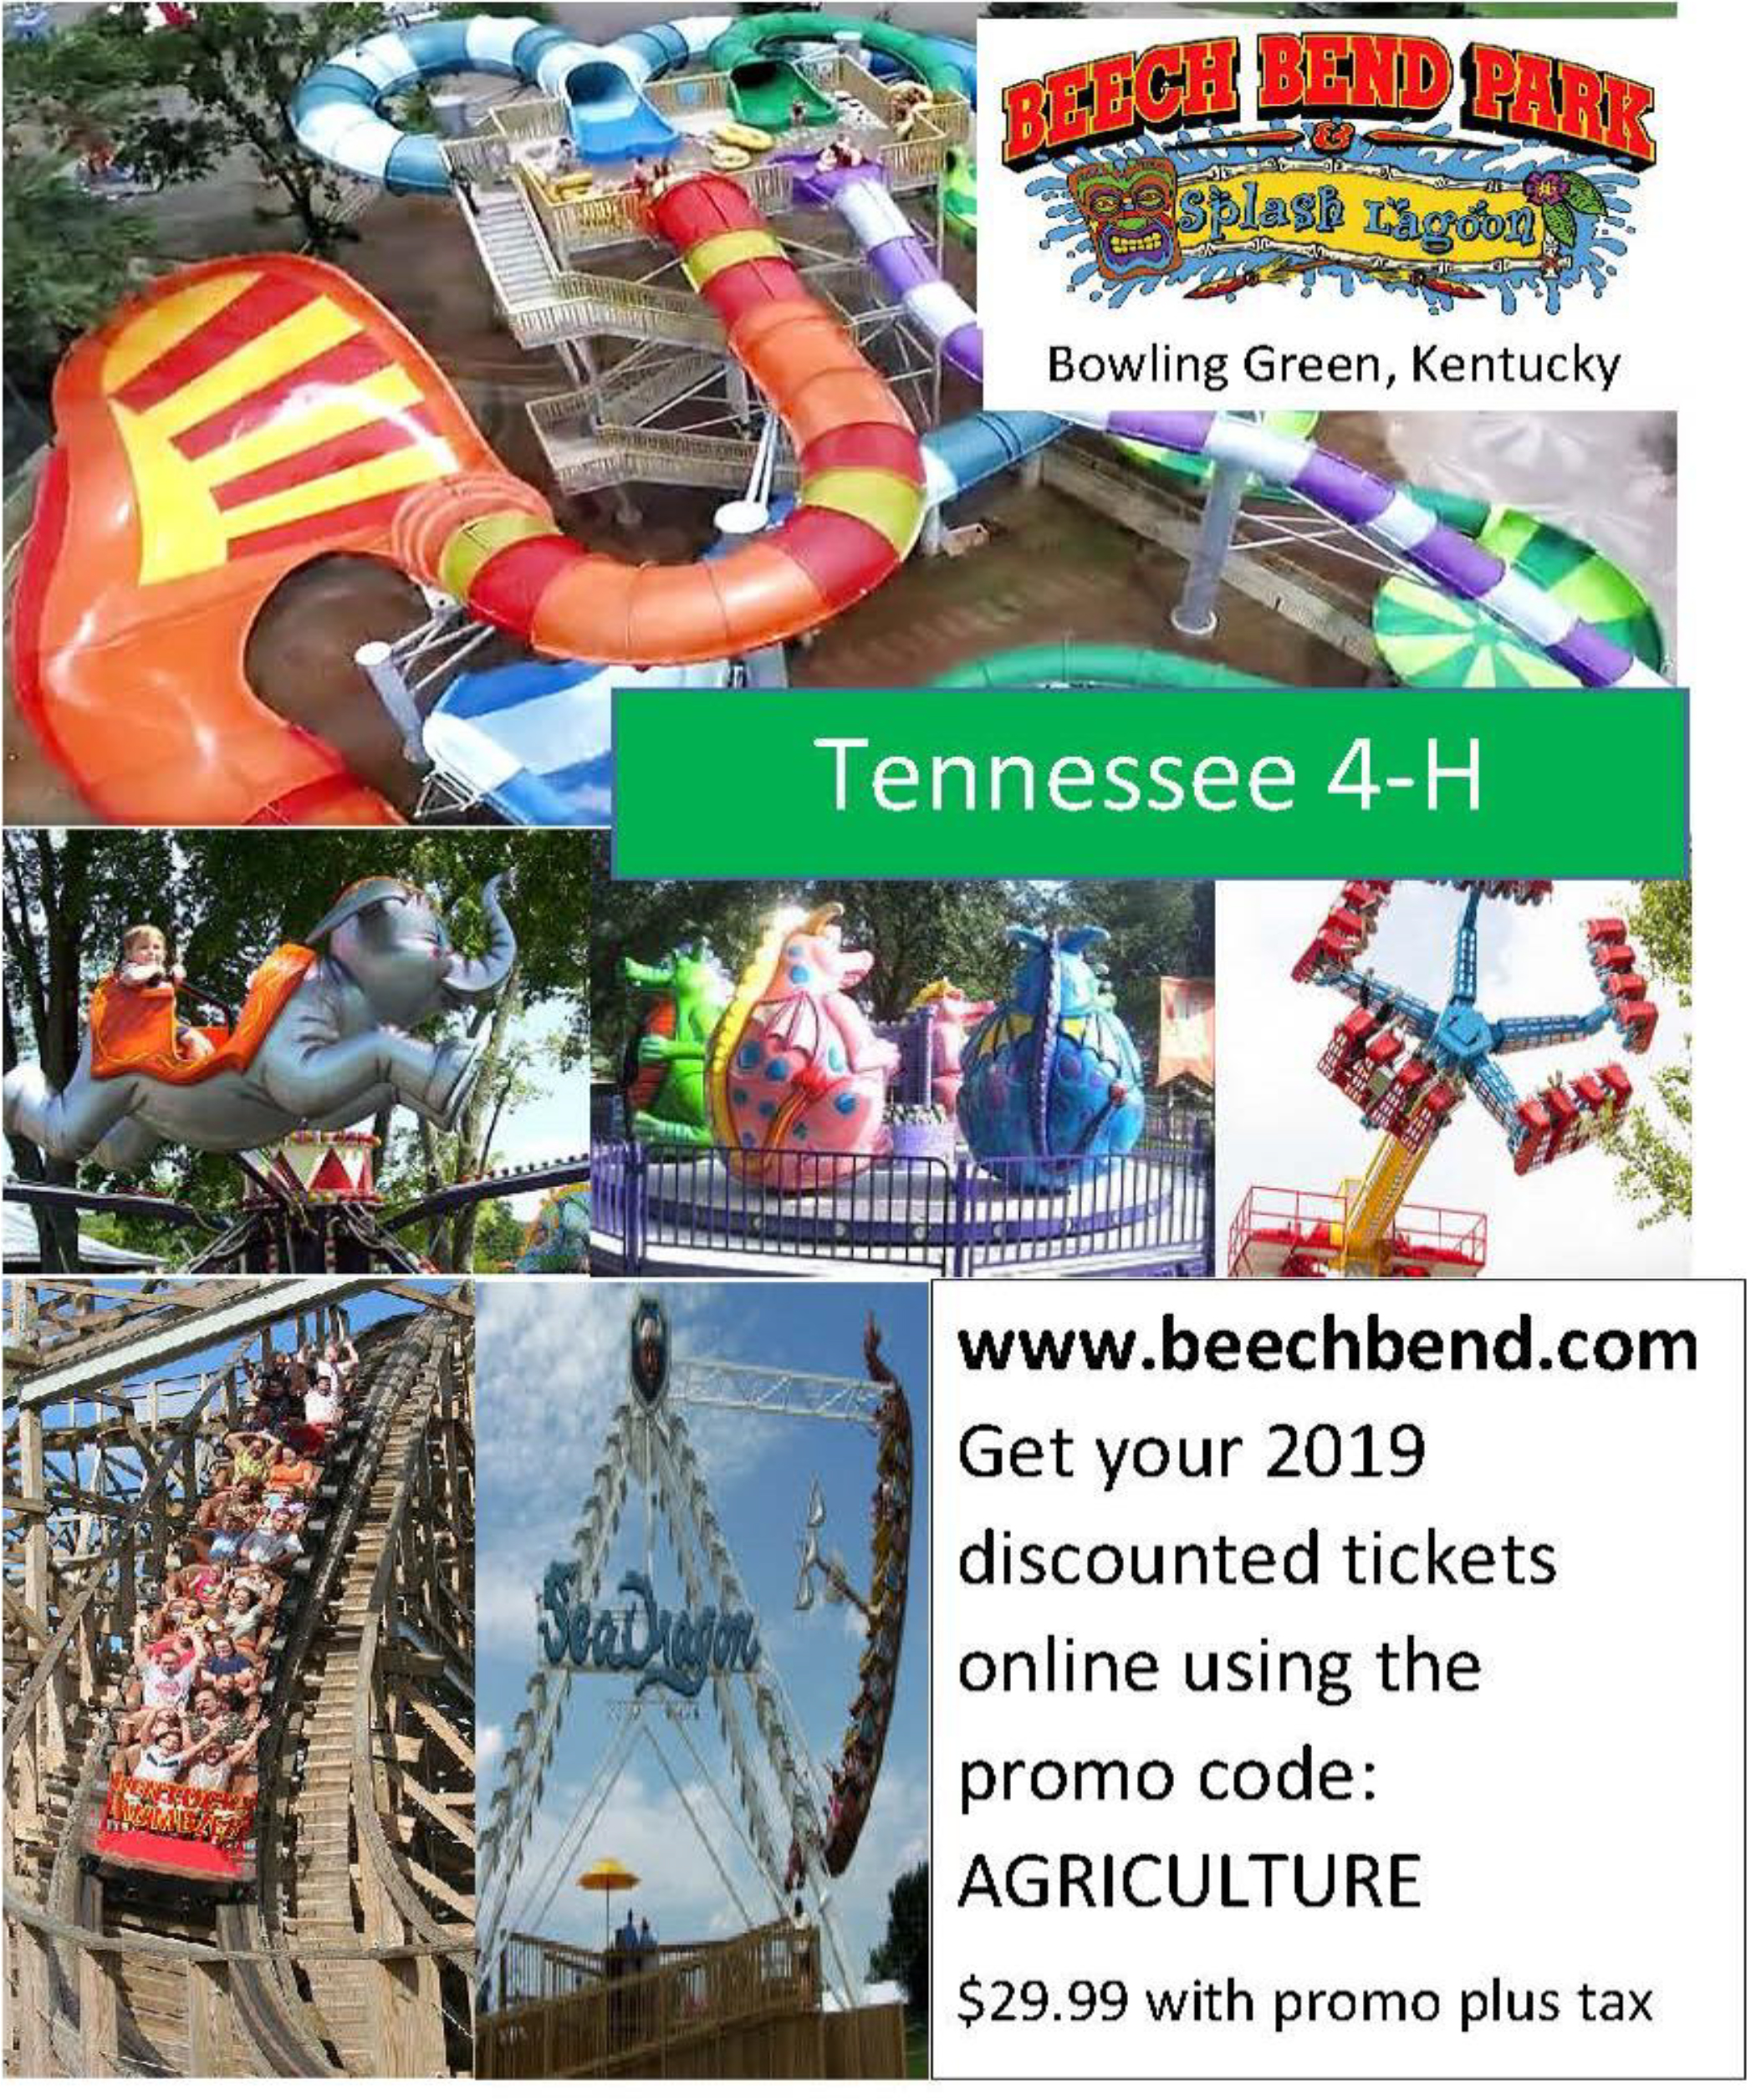 Beach Bend Park Discount for Tennessee 4H Tennessee 4H Youth